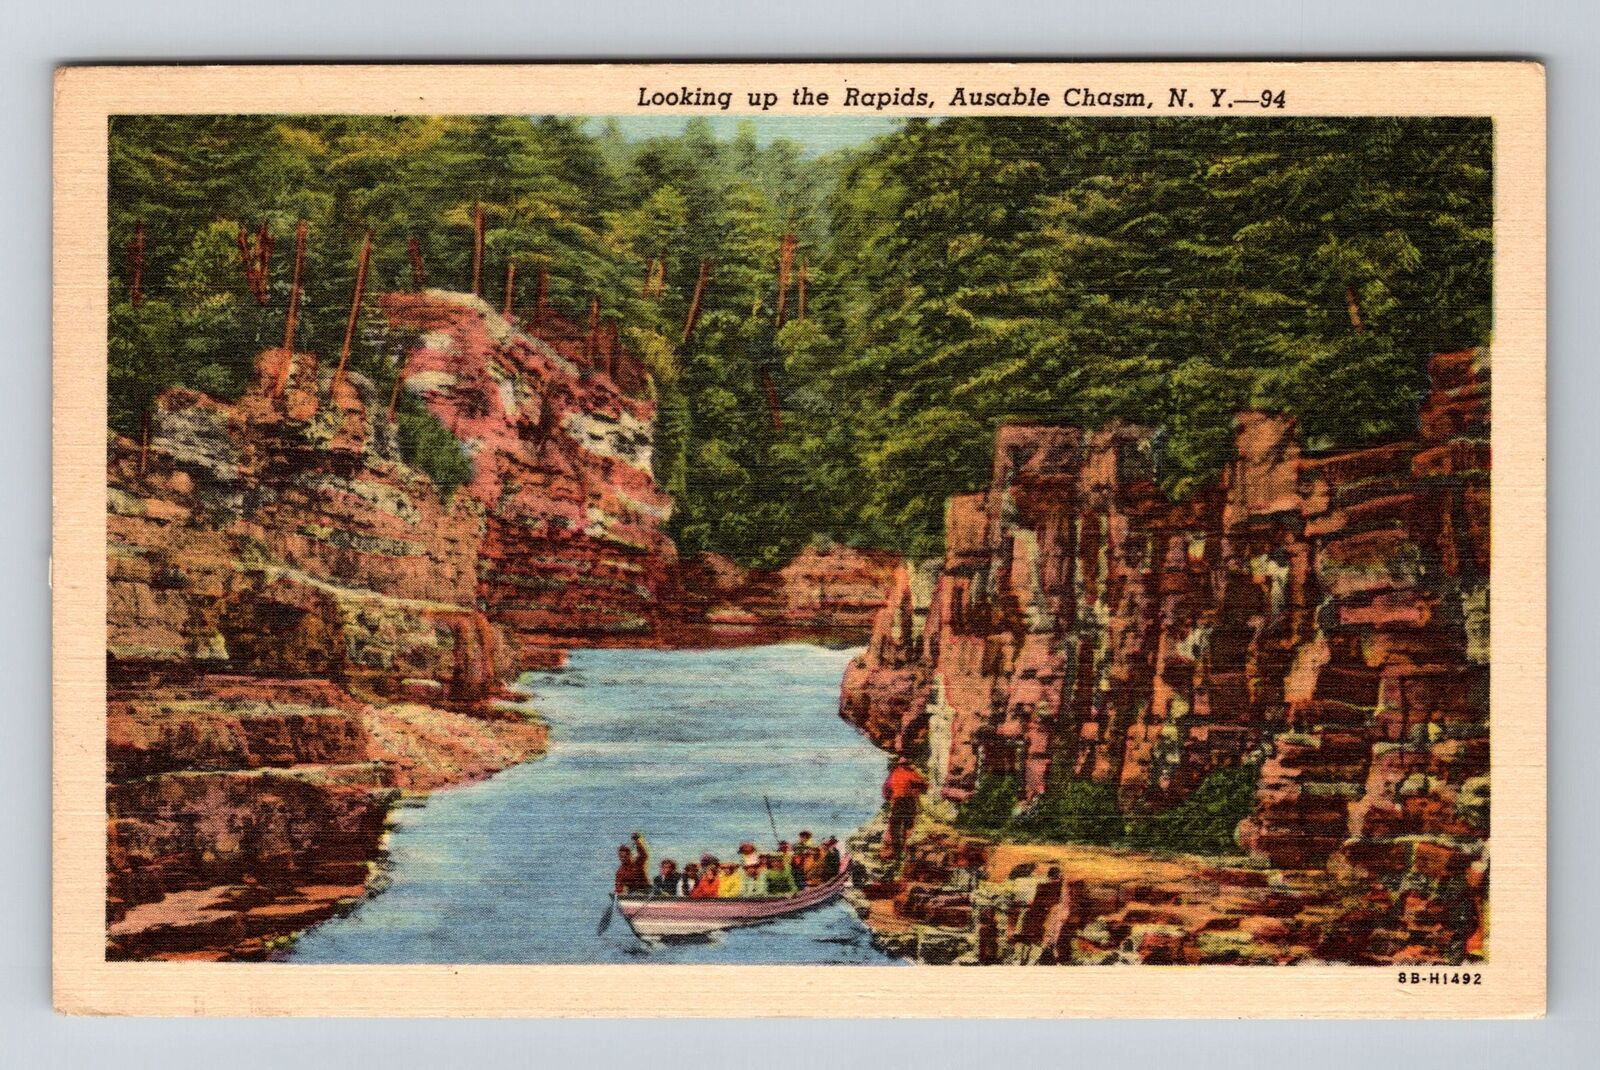 AuSable Chasm NY-New York, Looking Up The Rapids Vintage c1955 Souvenir Postcard